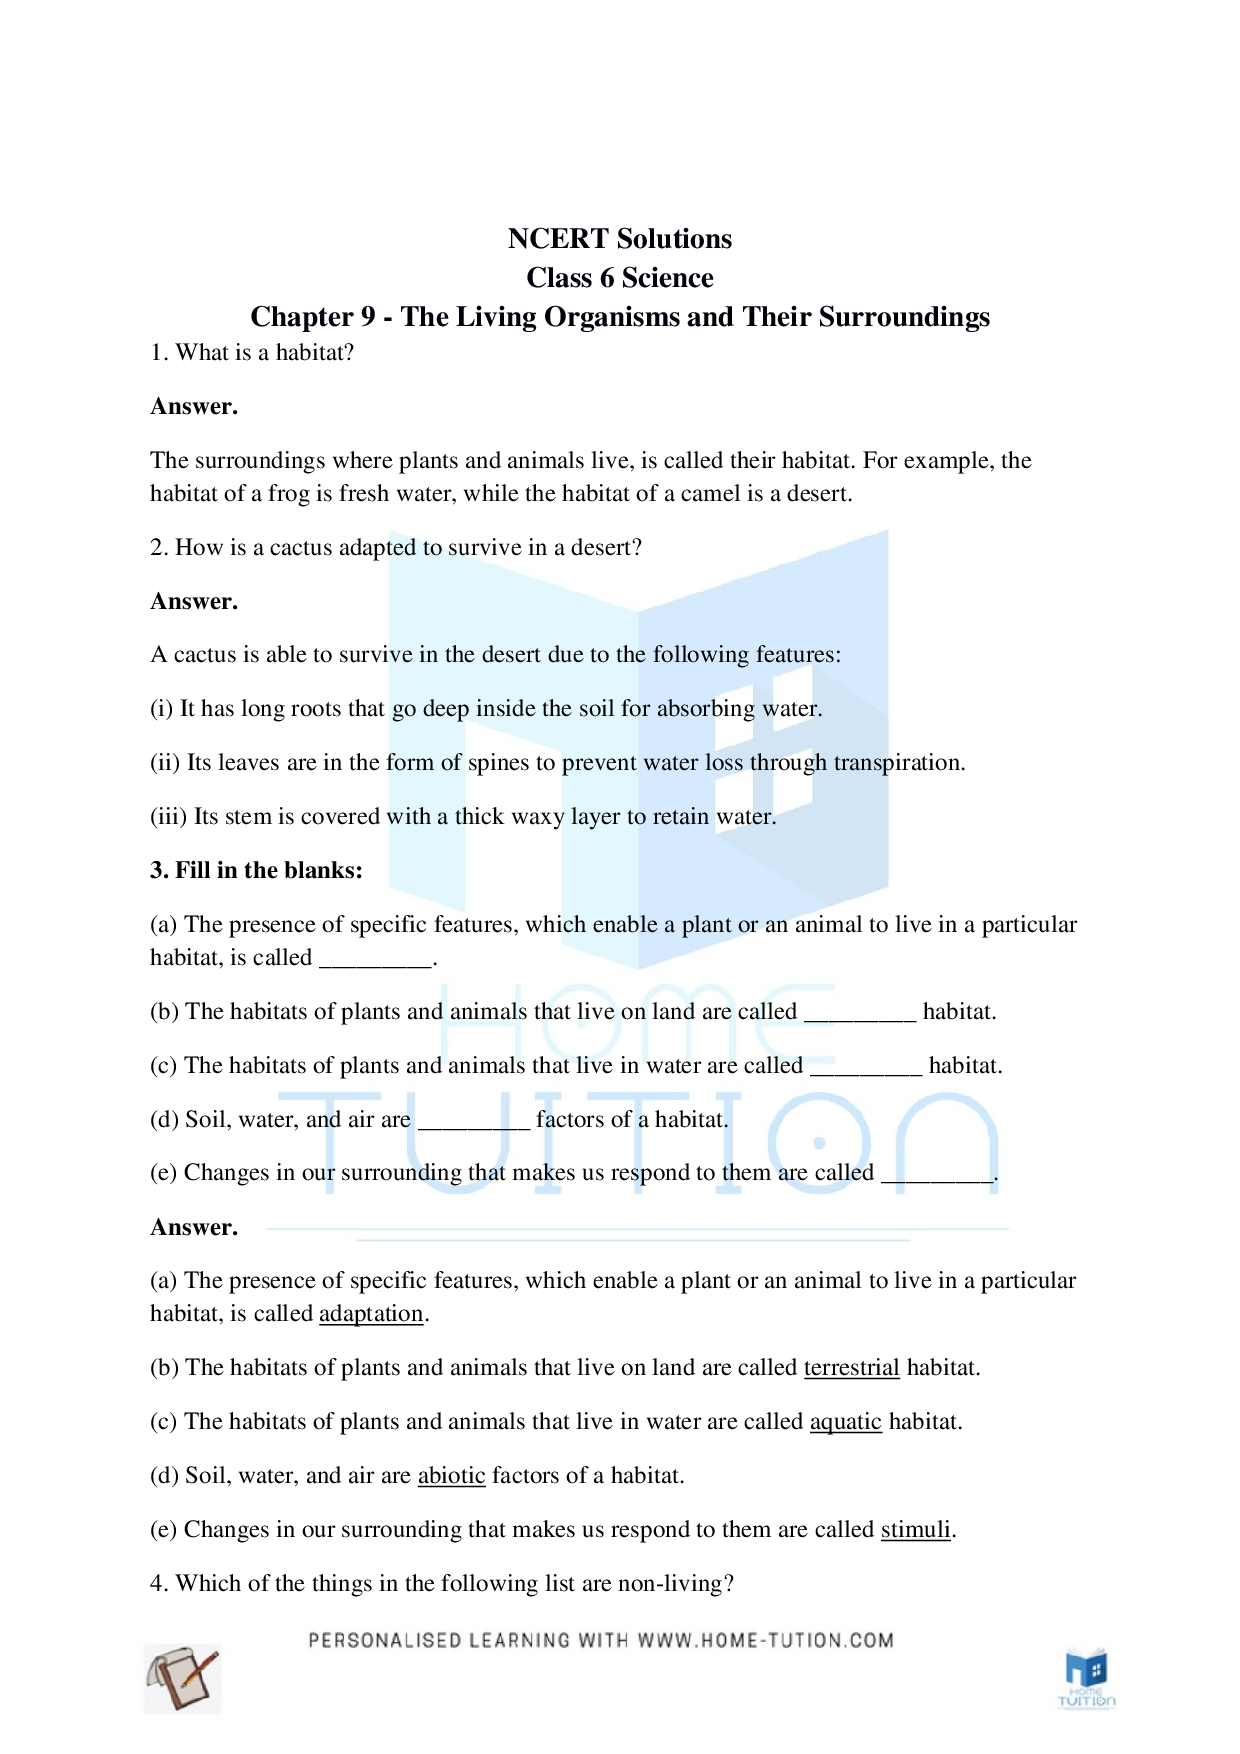 Class 6 Science Chapter 9 The Living Organisms and Their Surroundings